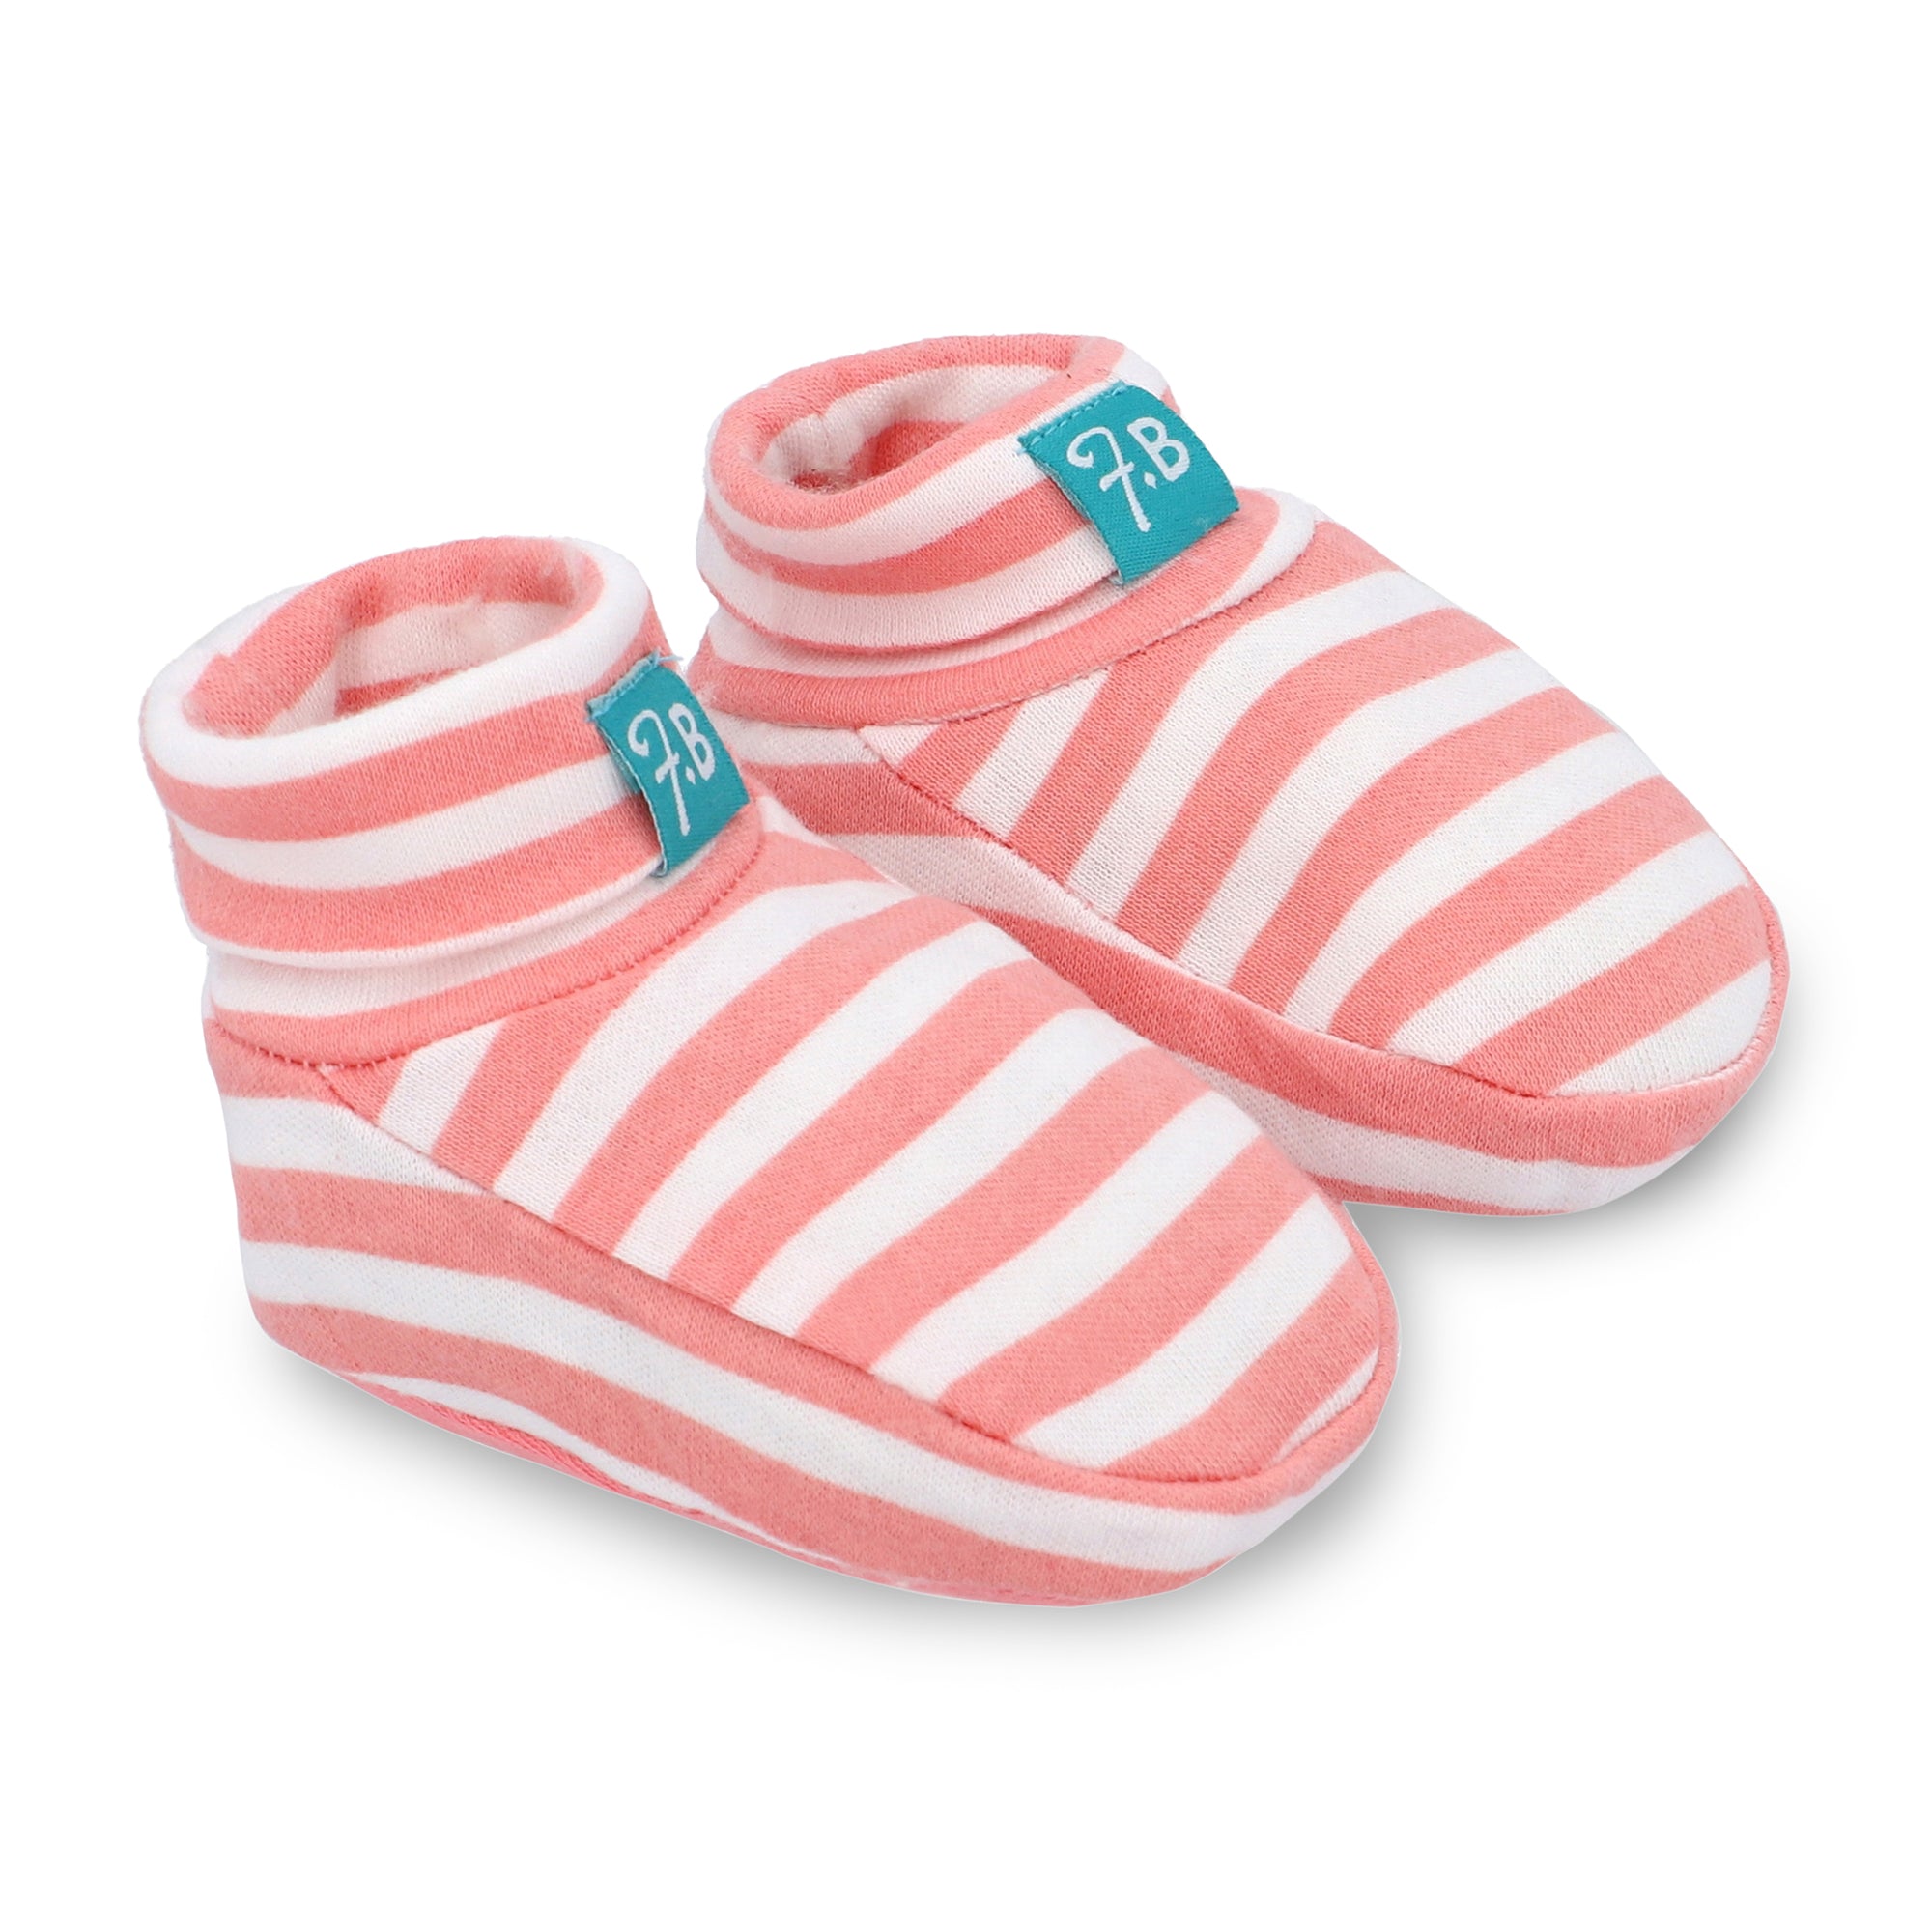 FG-9001 Pink Stripe Cotton Booties for 0-12 Months